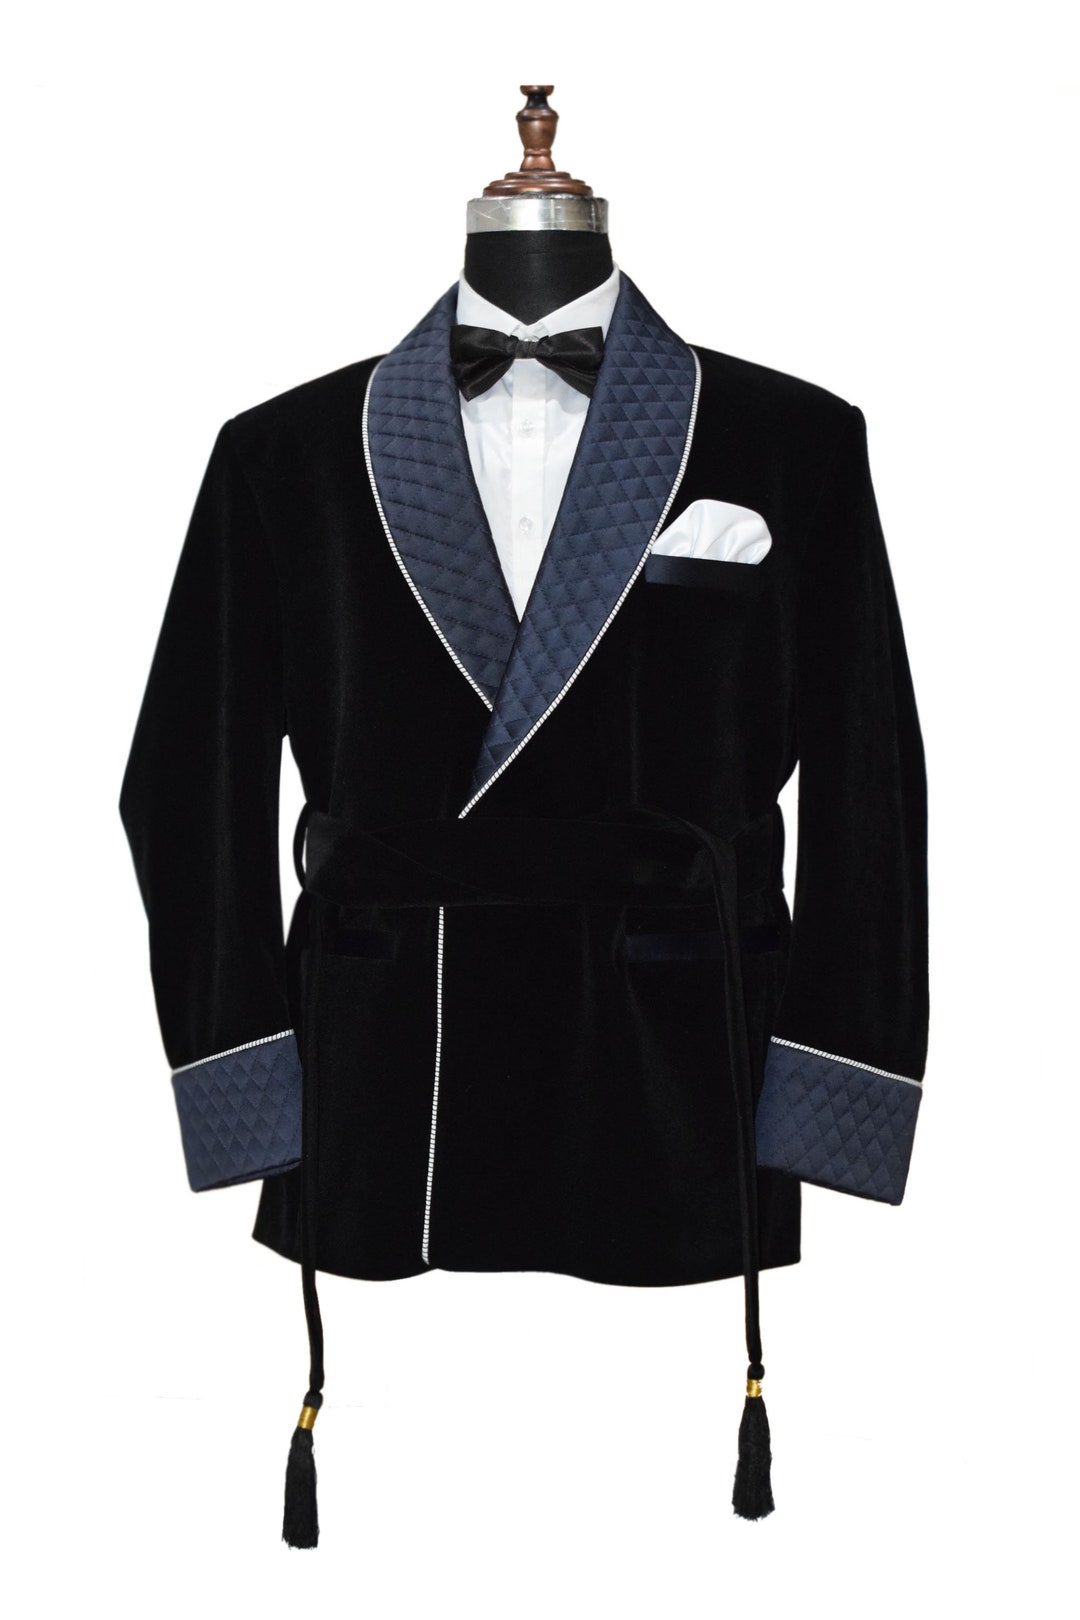 Special Gift for Him Men's Smoking Jacket With Navy Blue - Etsy